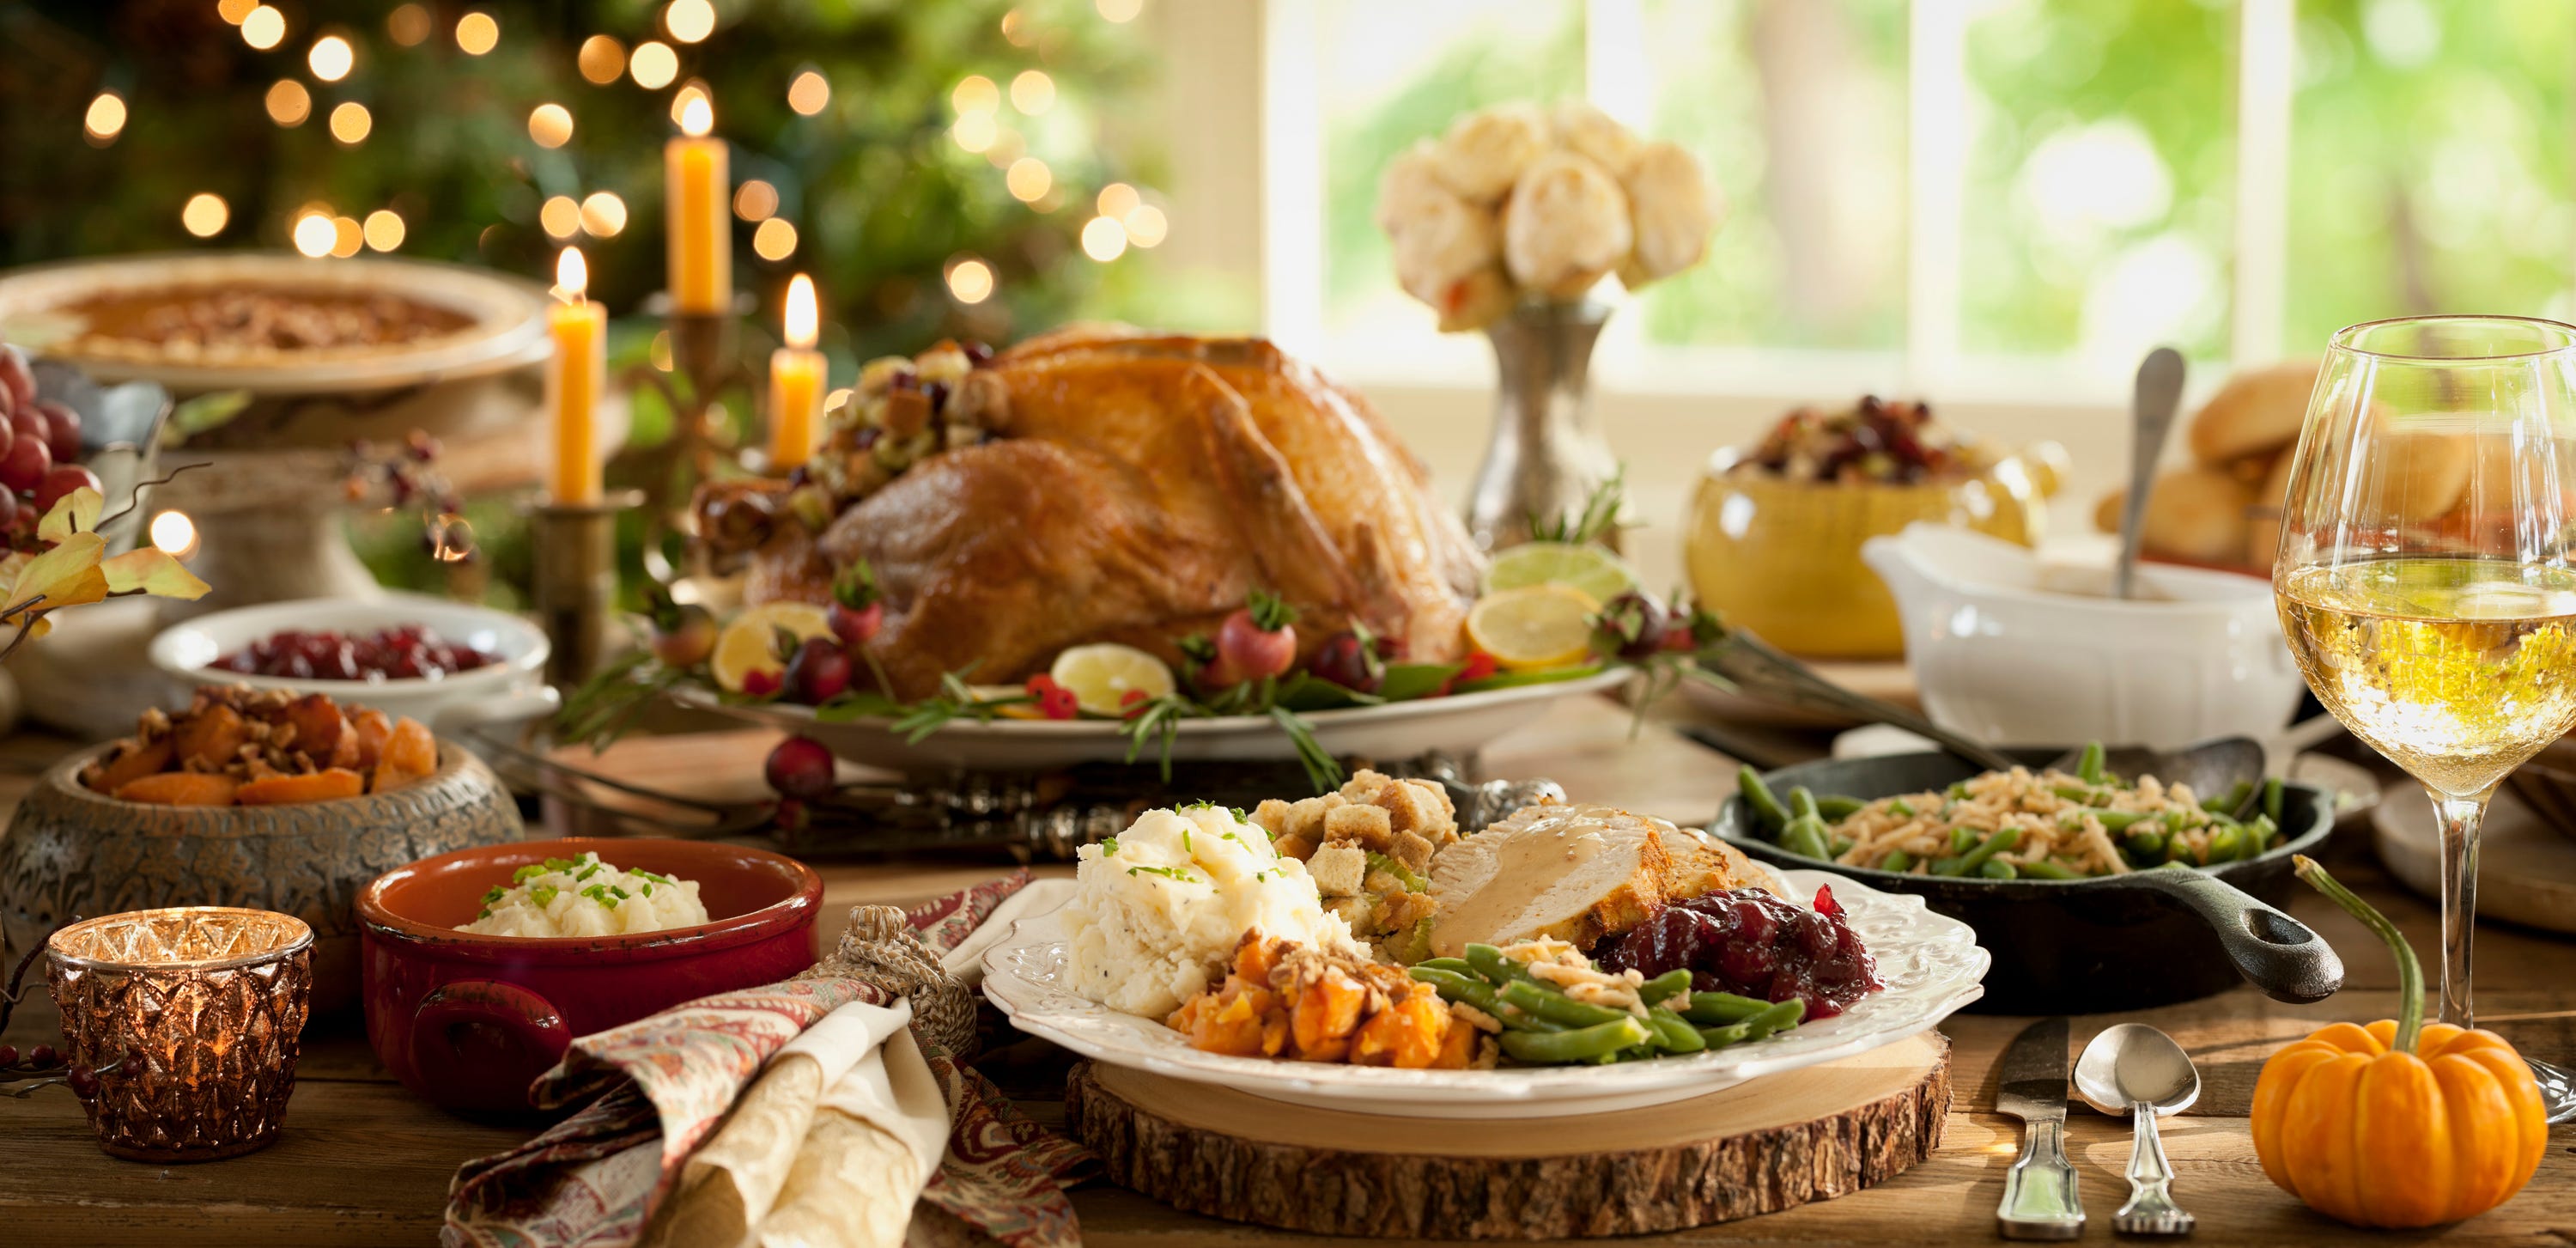 How Food Supply Issues May Affect Your Thanksgiving Table